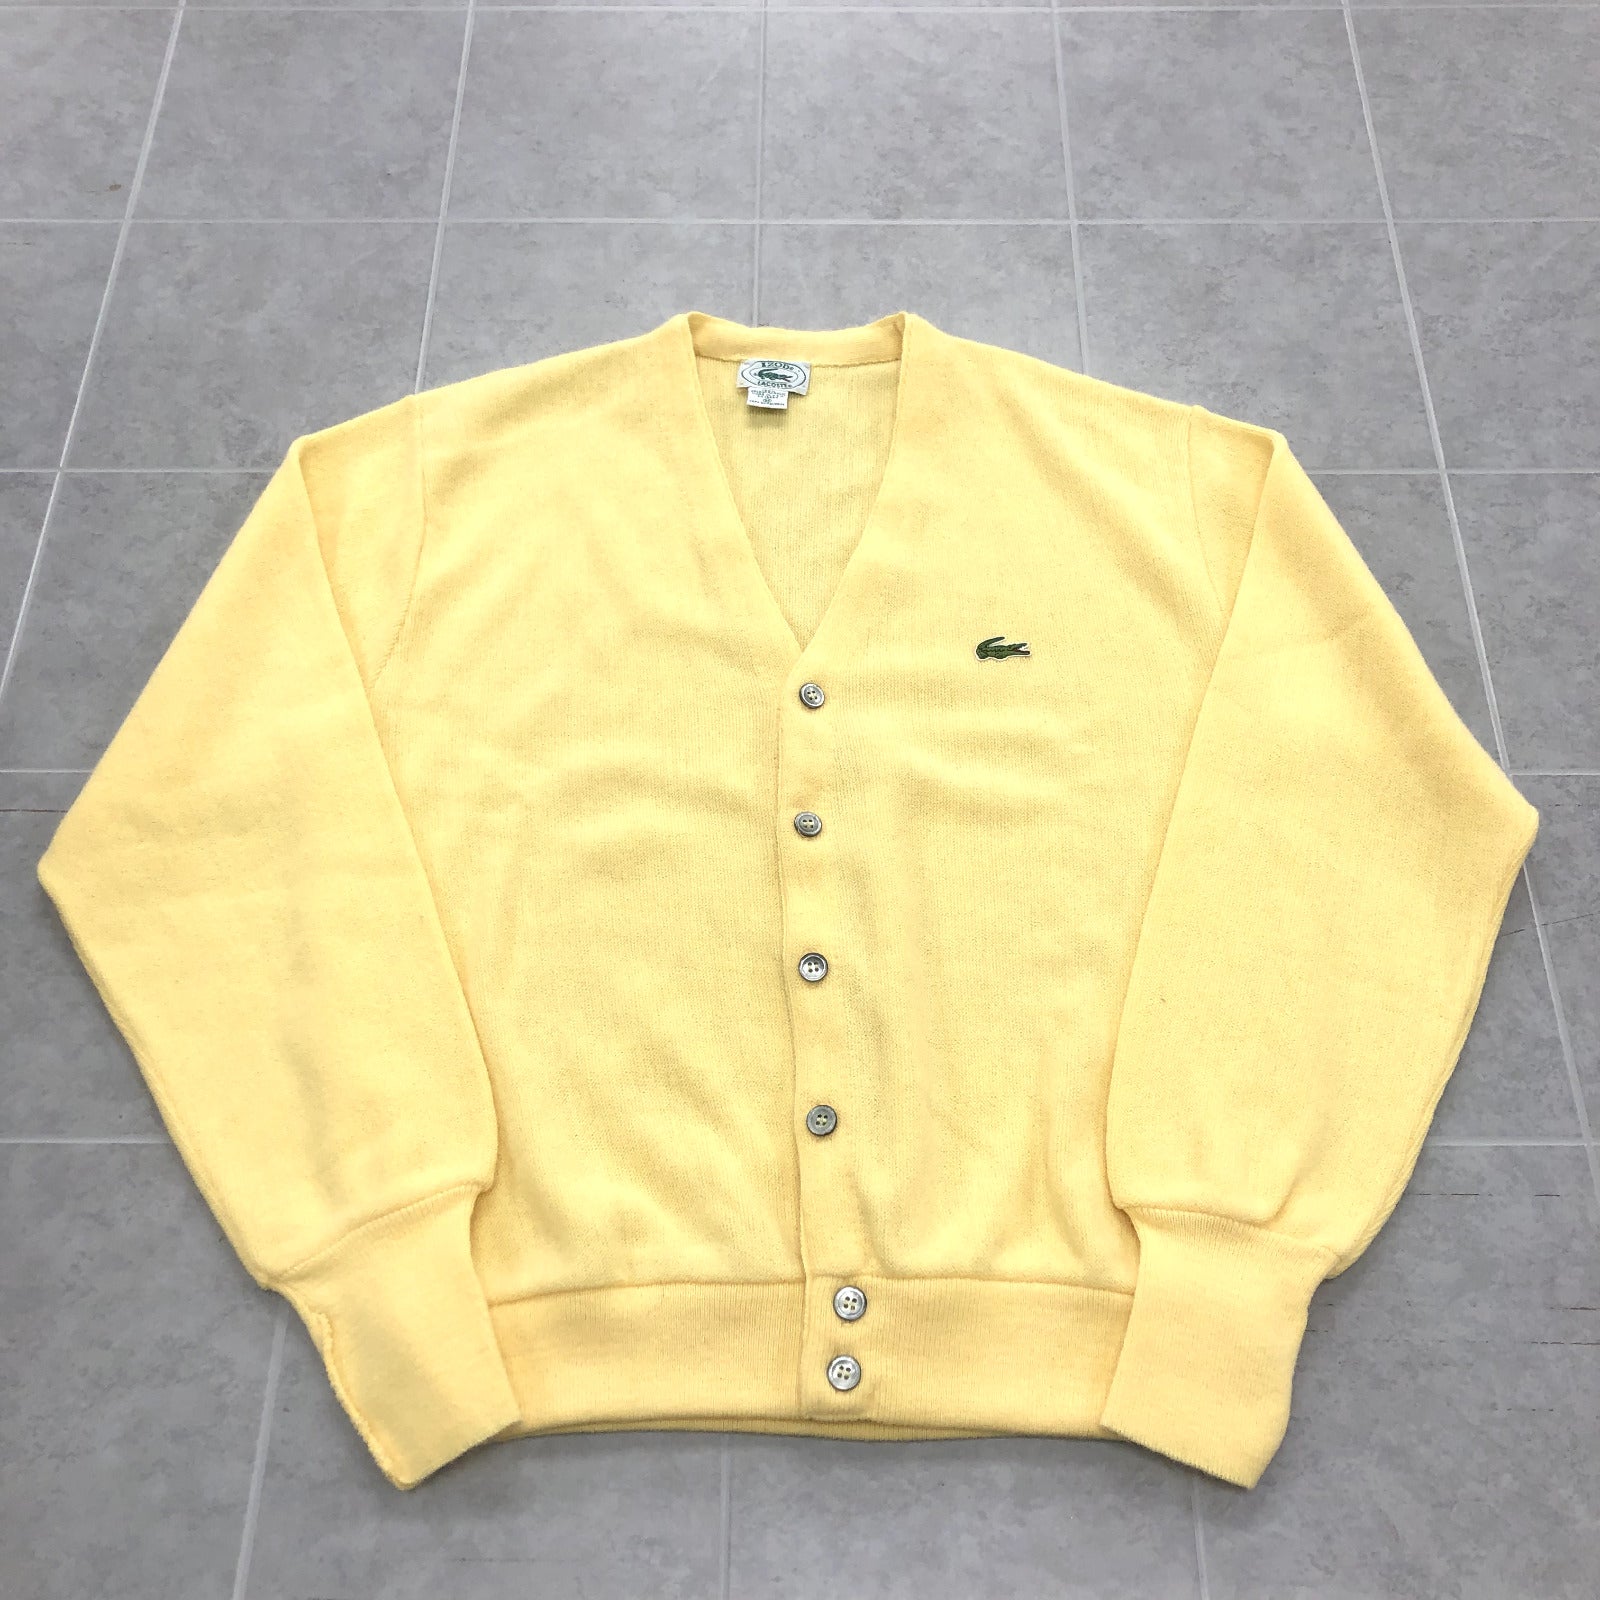 Vintage IZOD Lacoste Yellow Long Sleeve Button Up Knit Cardigan Adult Size M